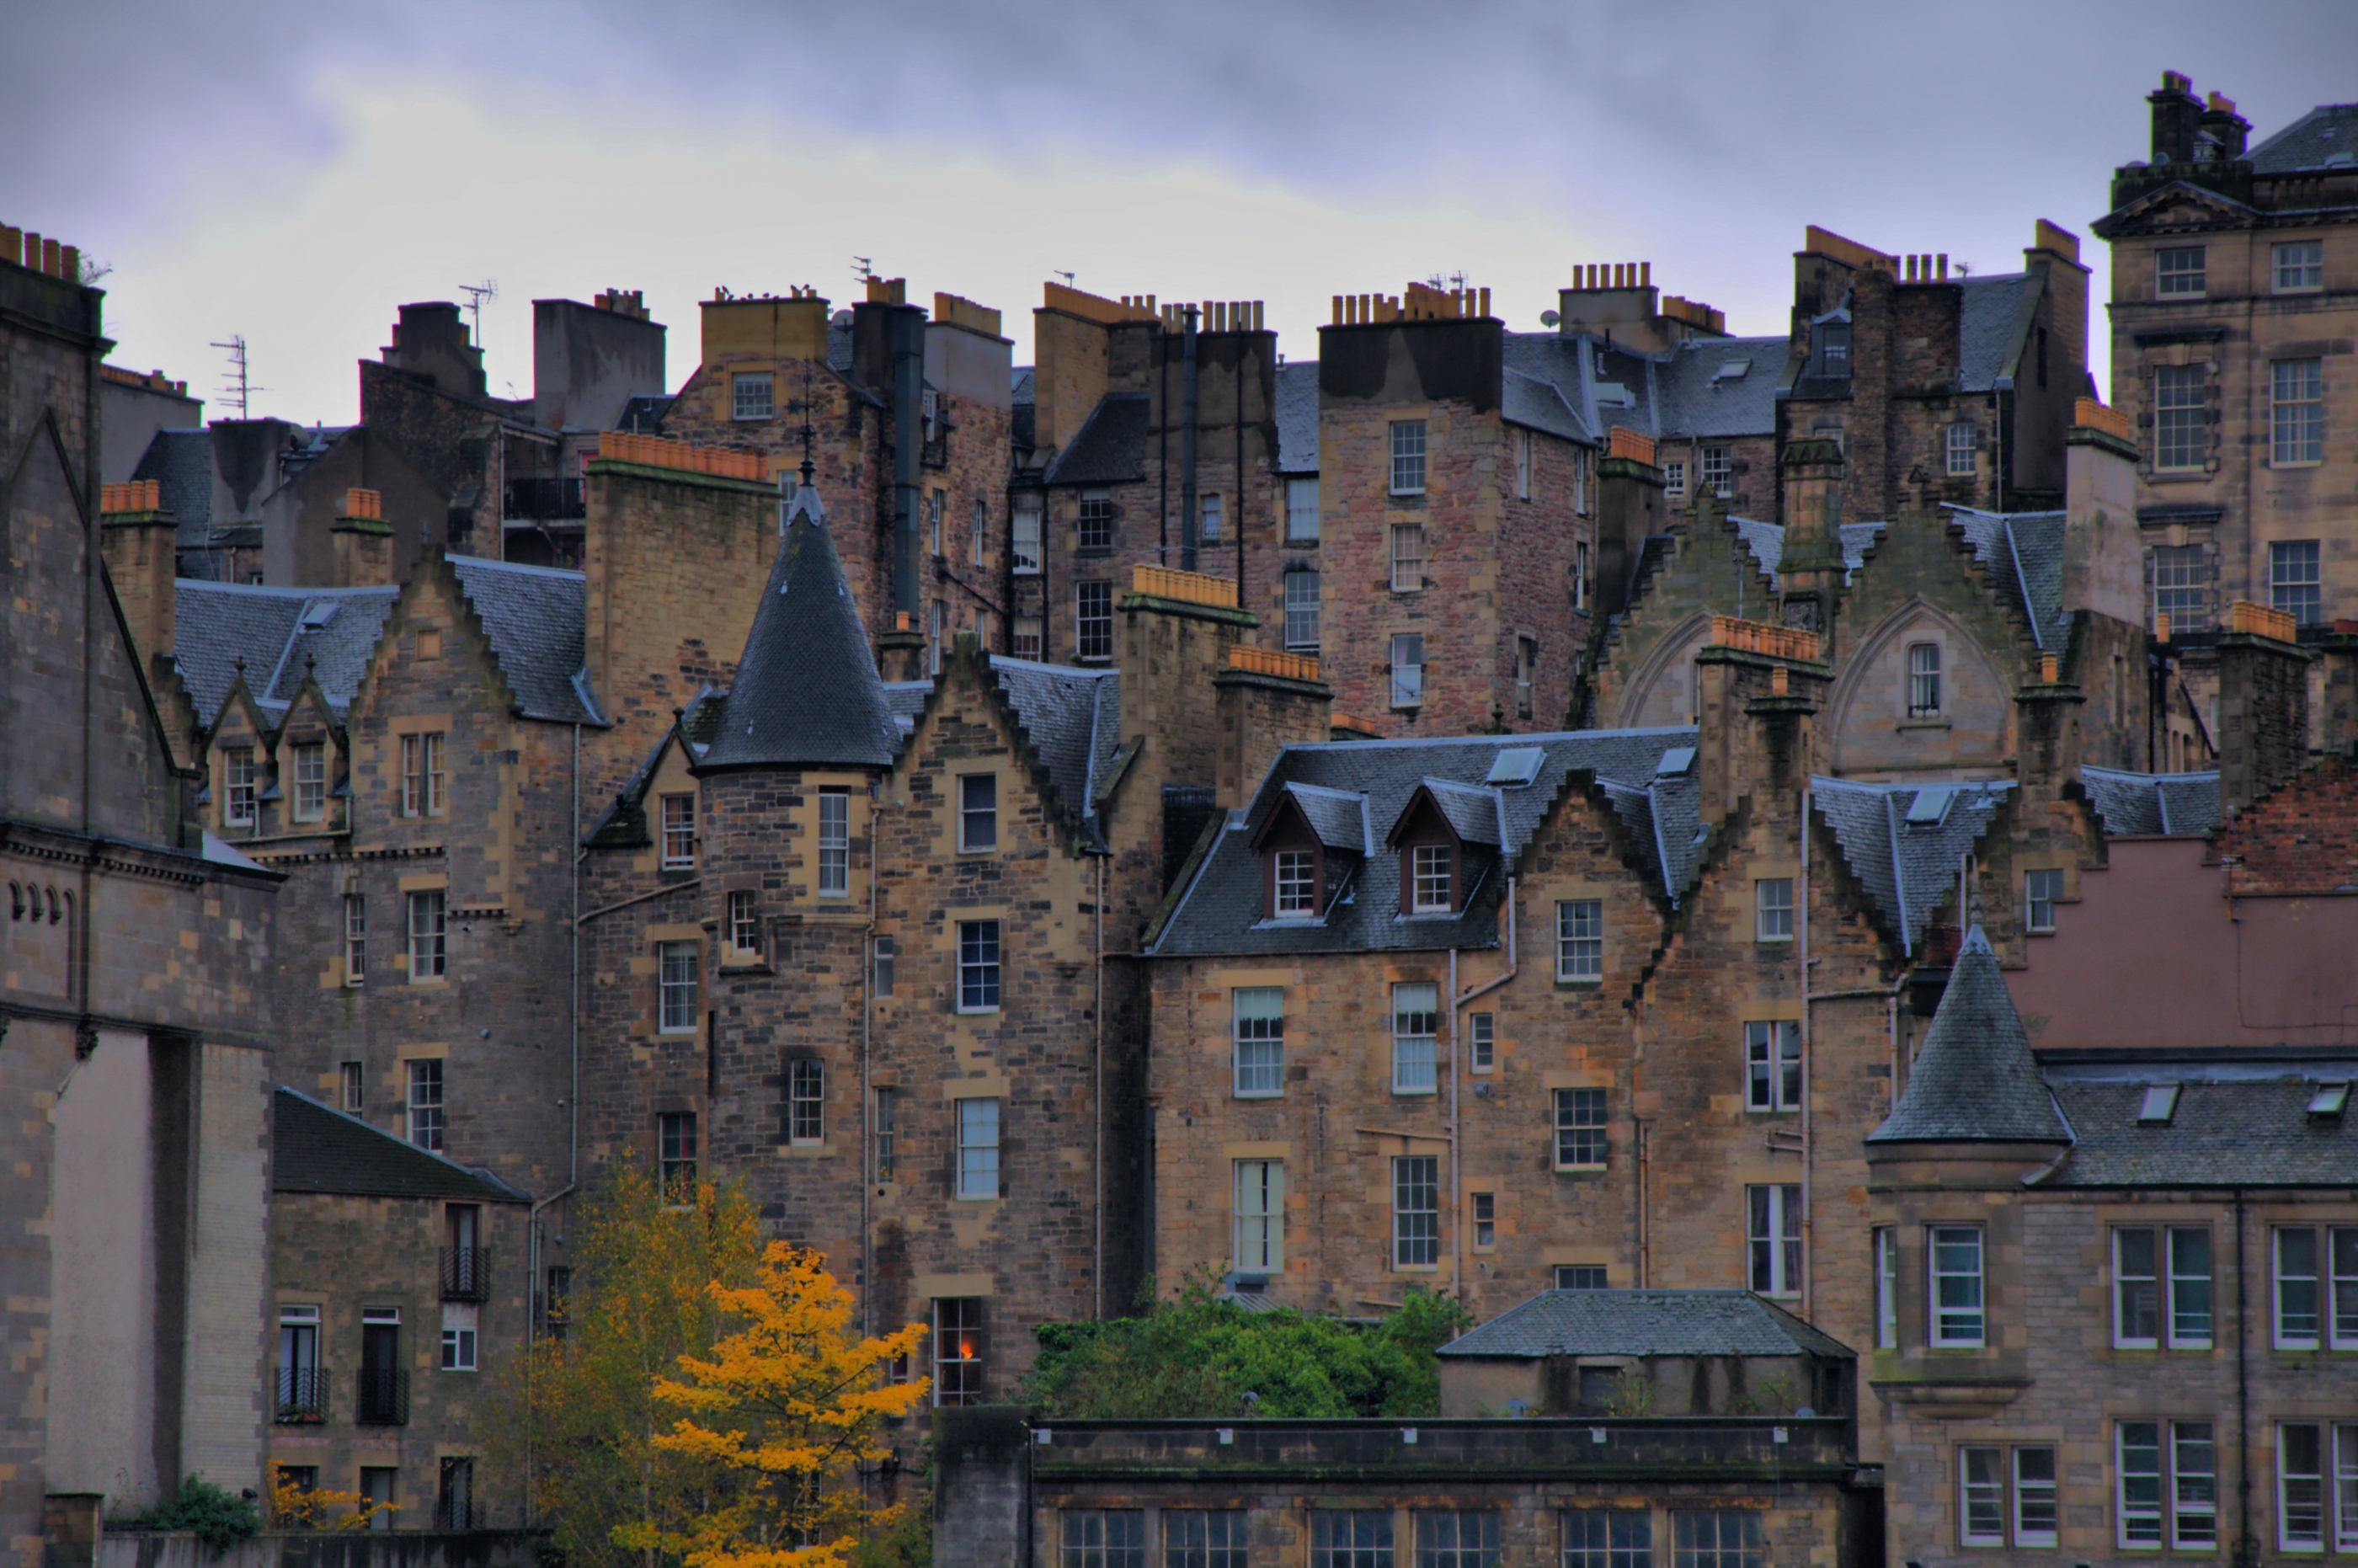 Old Town, Edinburgh, Scotland | Most Beautiful Places in the World